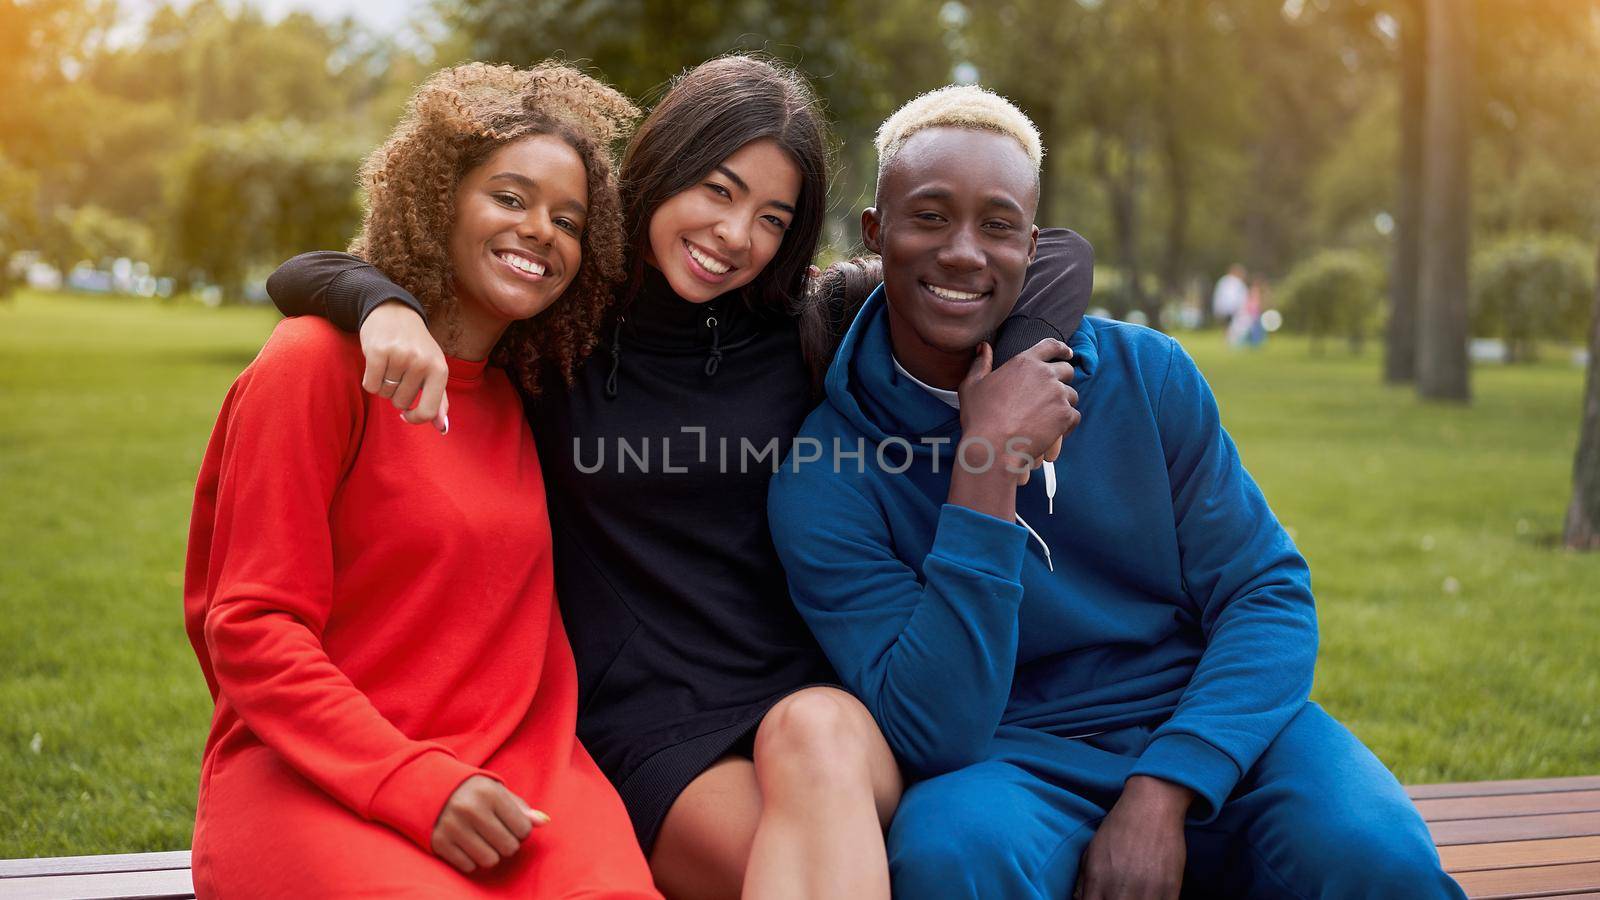 Multi-ethnic group teenage friends. African-american asian student spending time together Multiracial friendship Happy smiling People dressed colorful sportswear sitting bench park outdoor